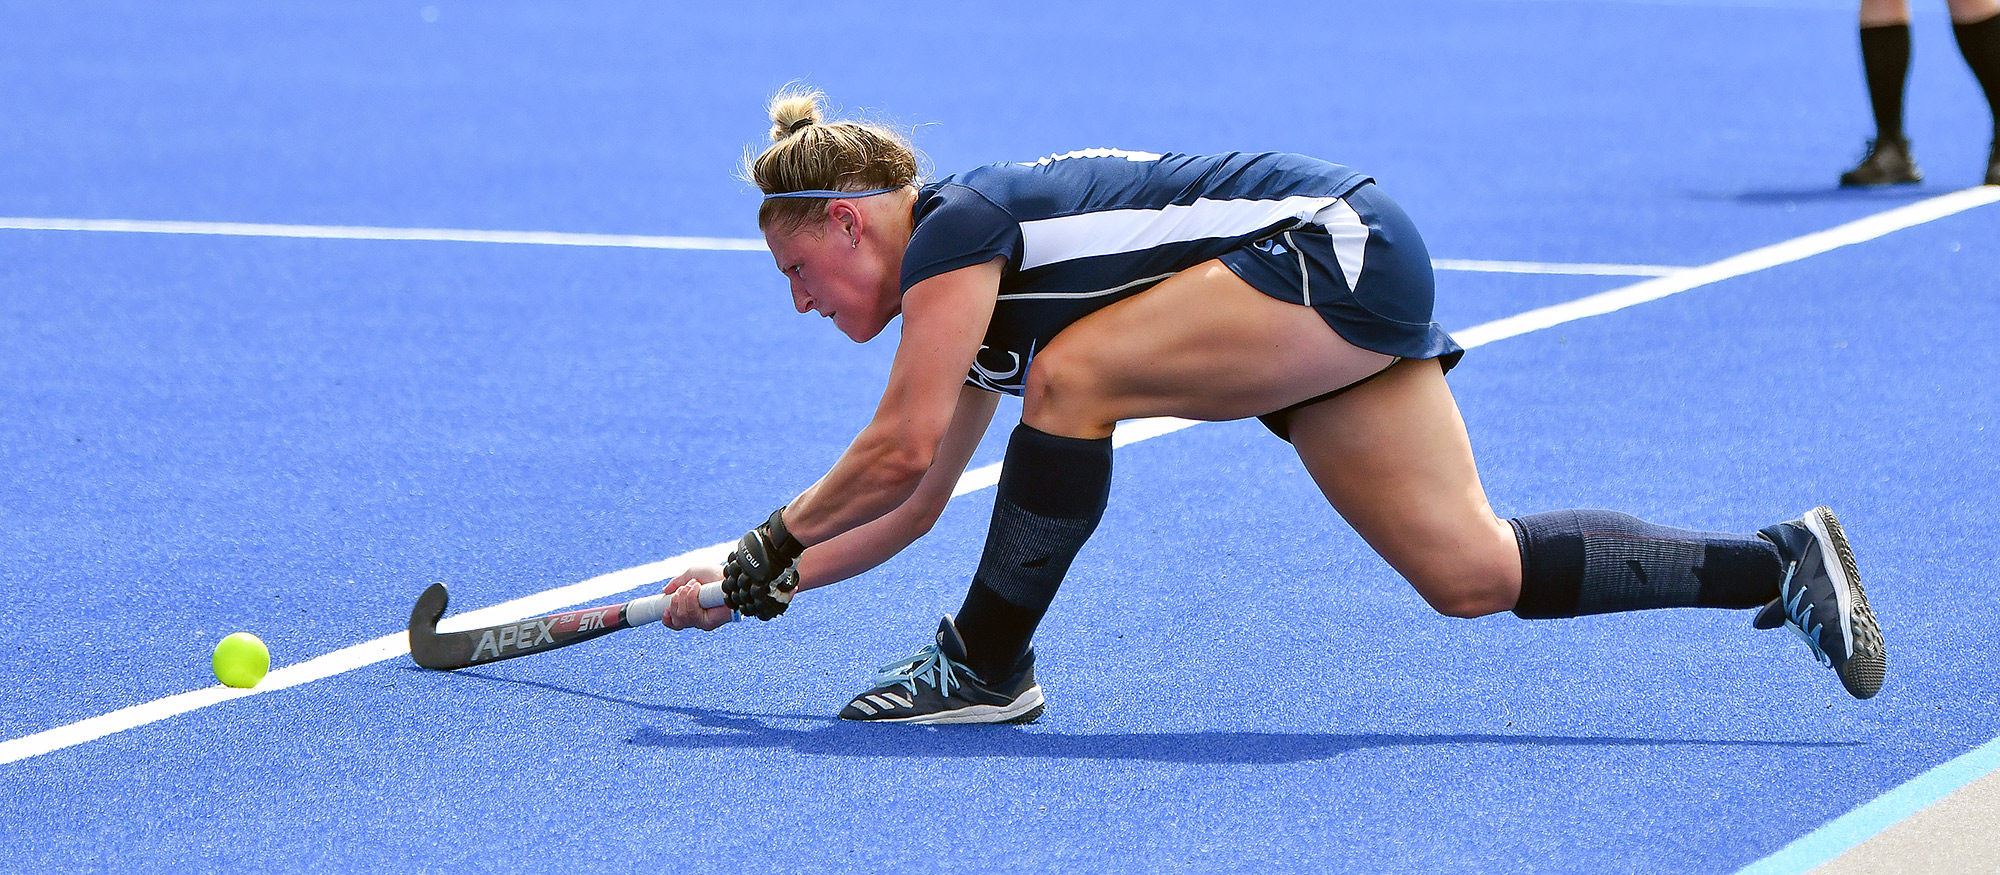 Laurissa Montigny took two of Mount Holyoke's six shots in a 4-0 loss to Smith on Oct. 4, 2022. (RJB Sports file photo)